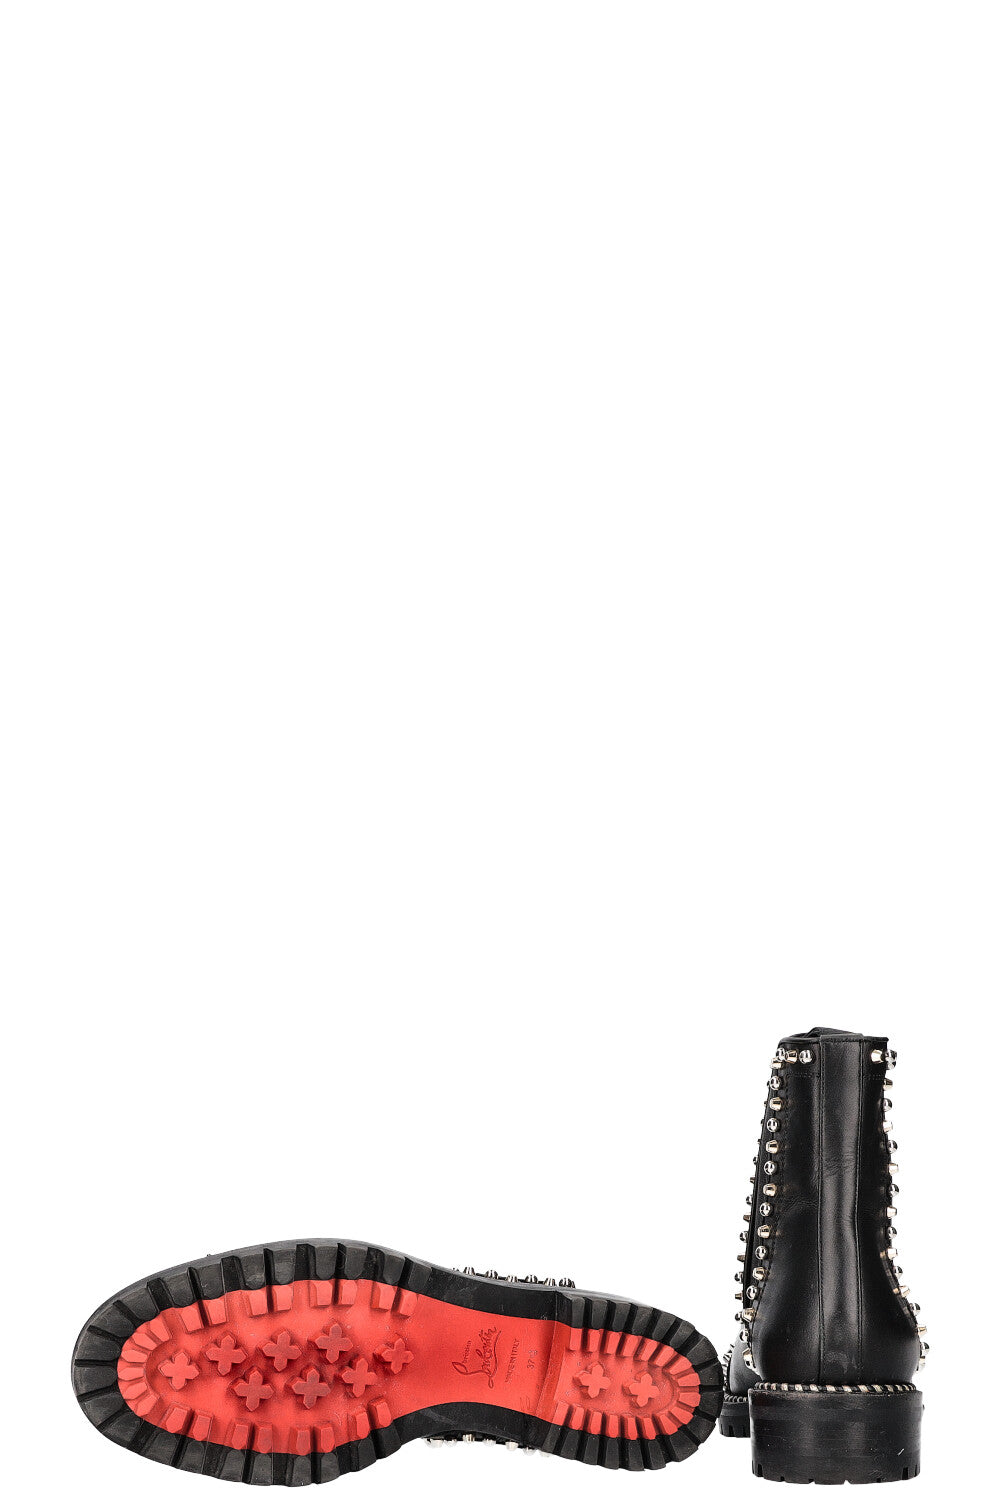 CHRISTIAN LOUBOUTIN Boots Chasse a Clou Black